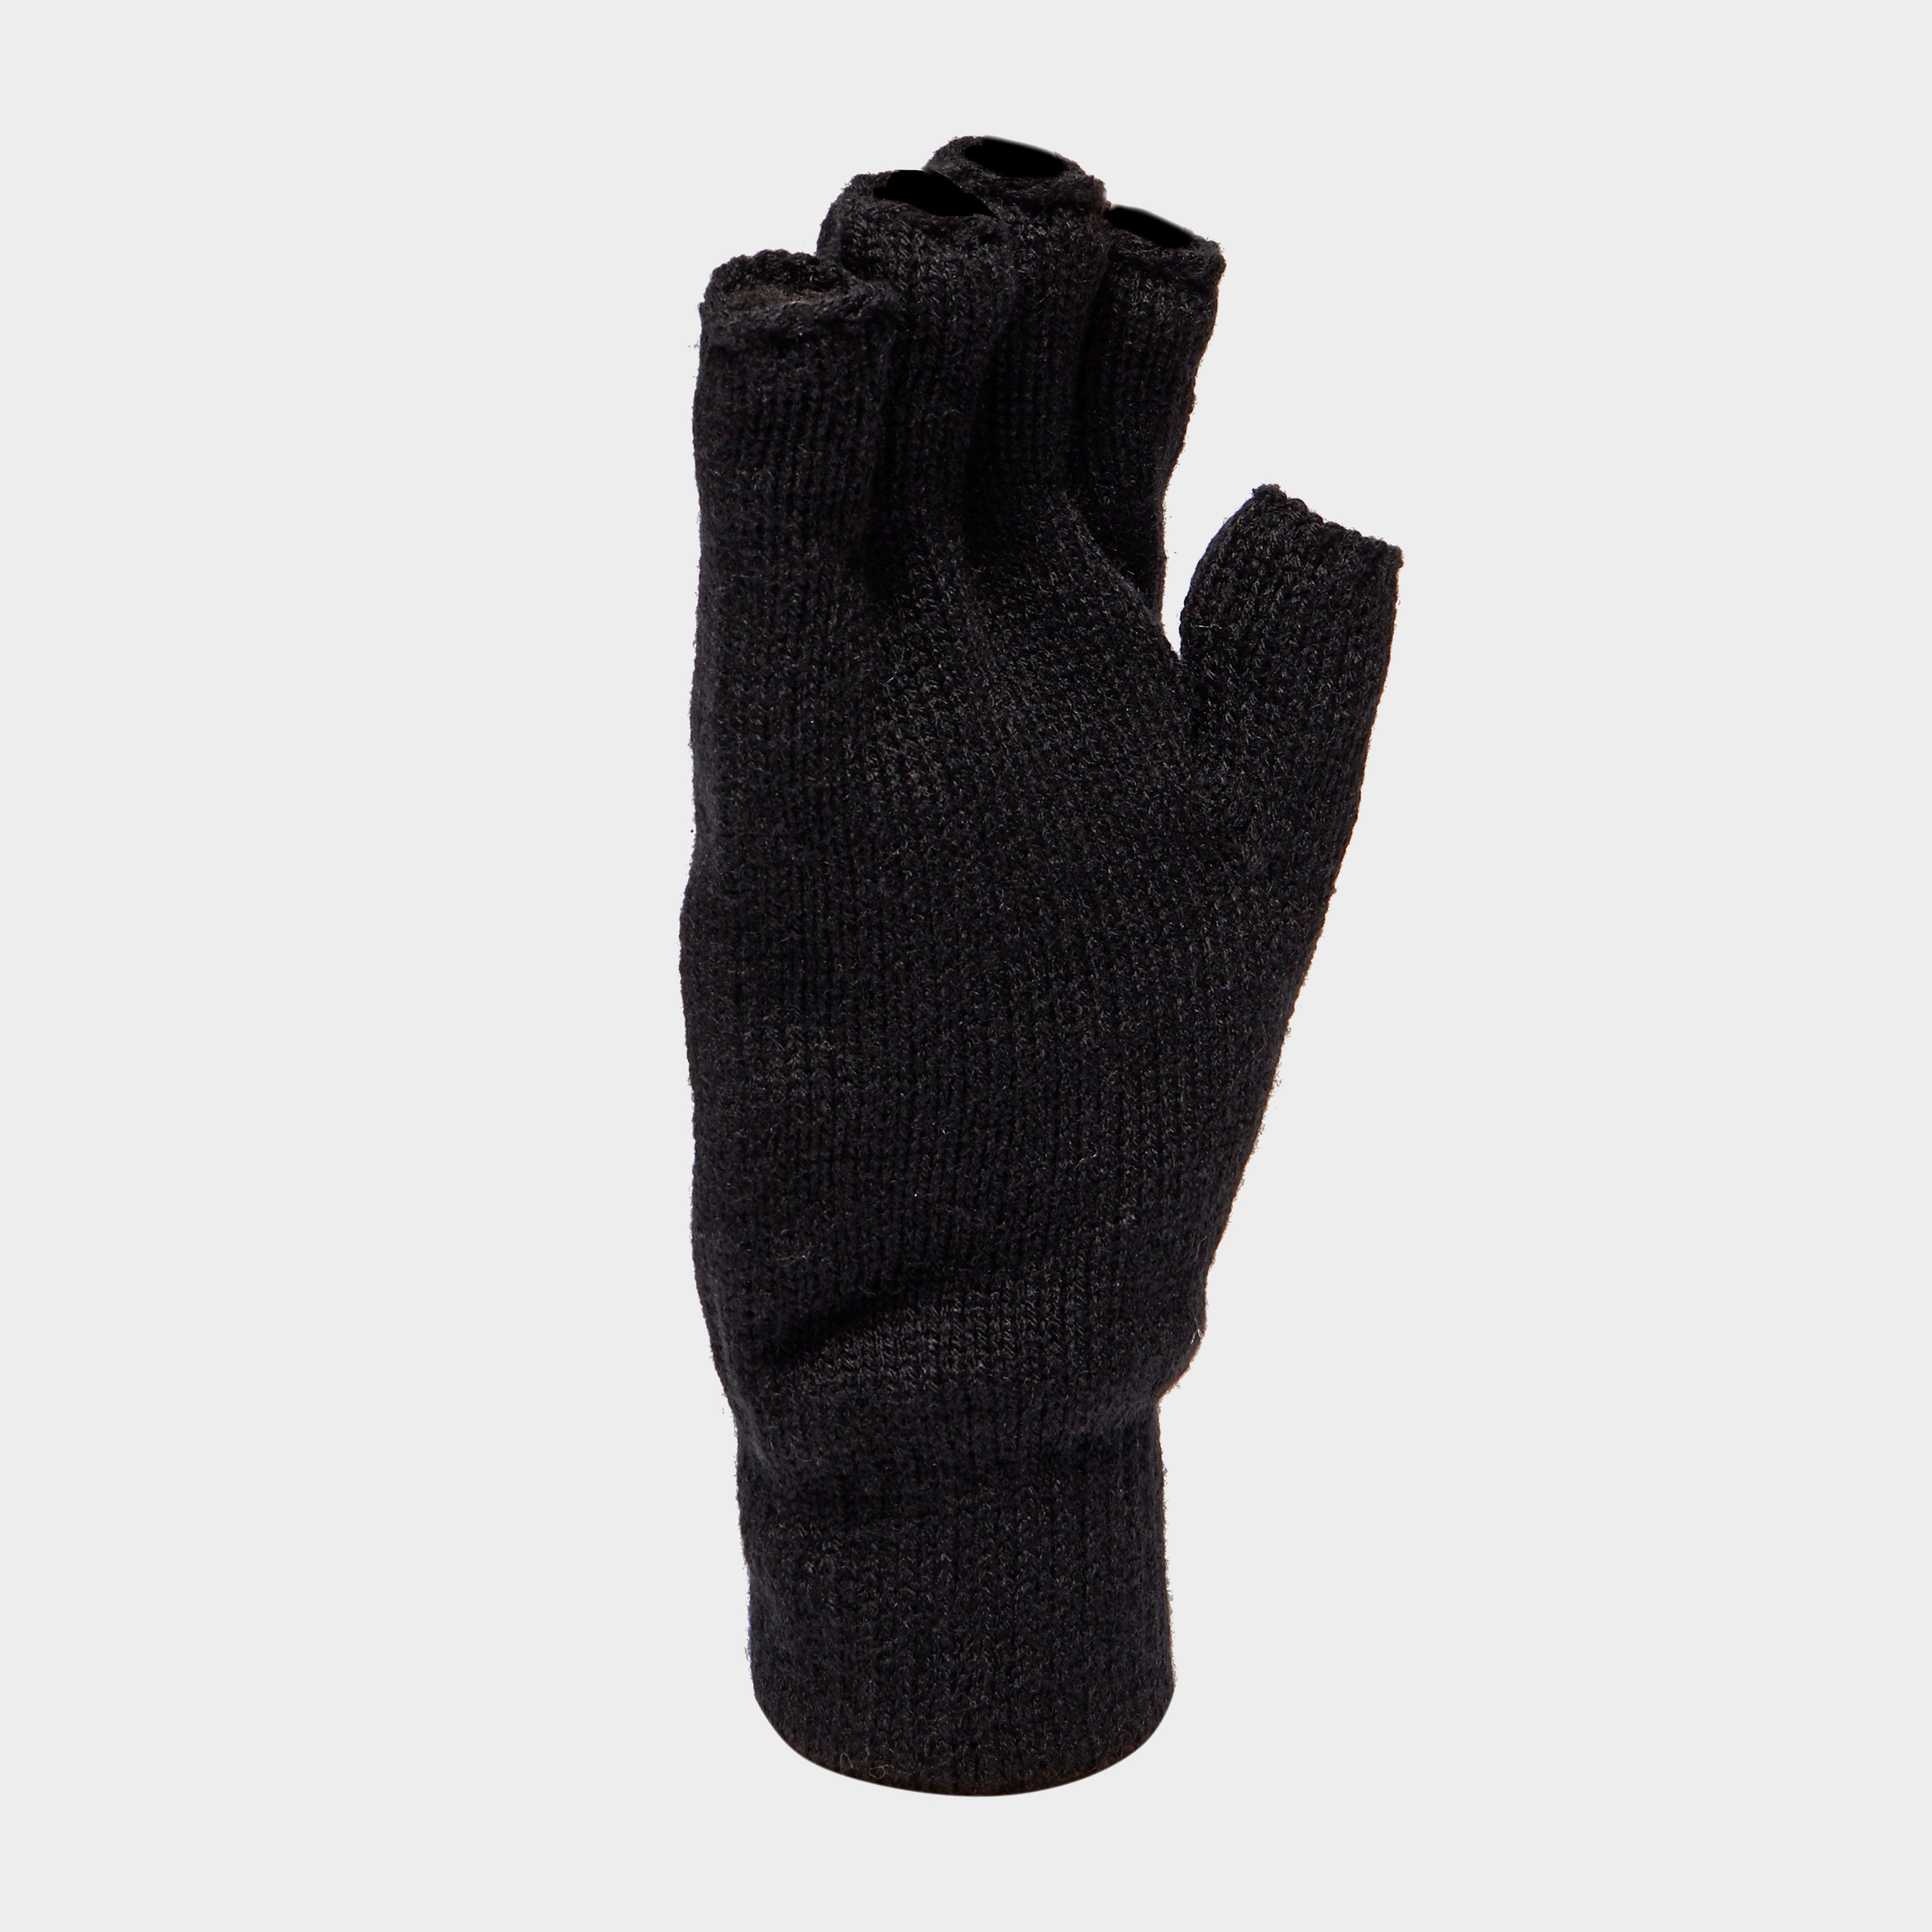 Peter Storm Thinsulate Fingerless Gloves Review